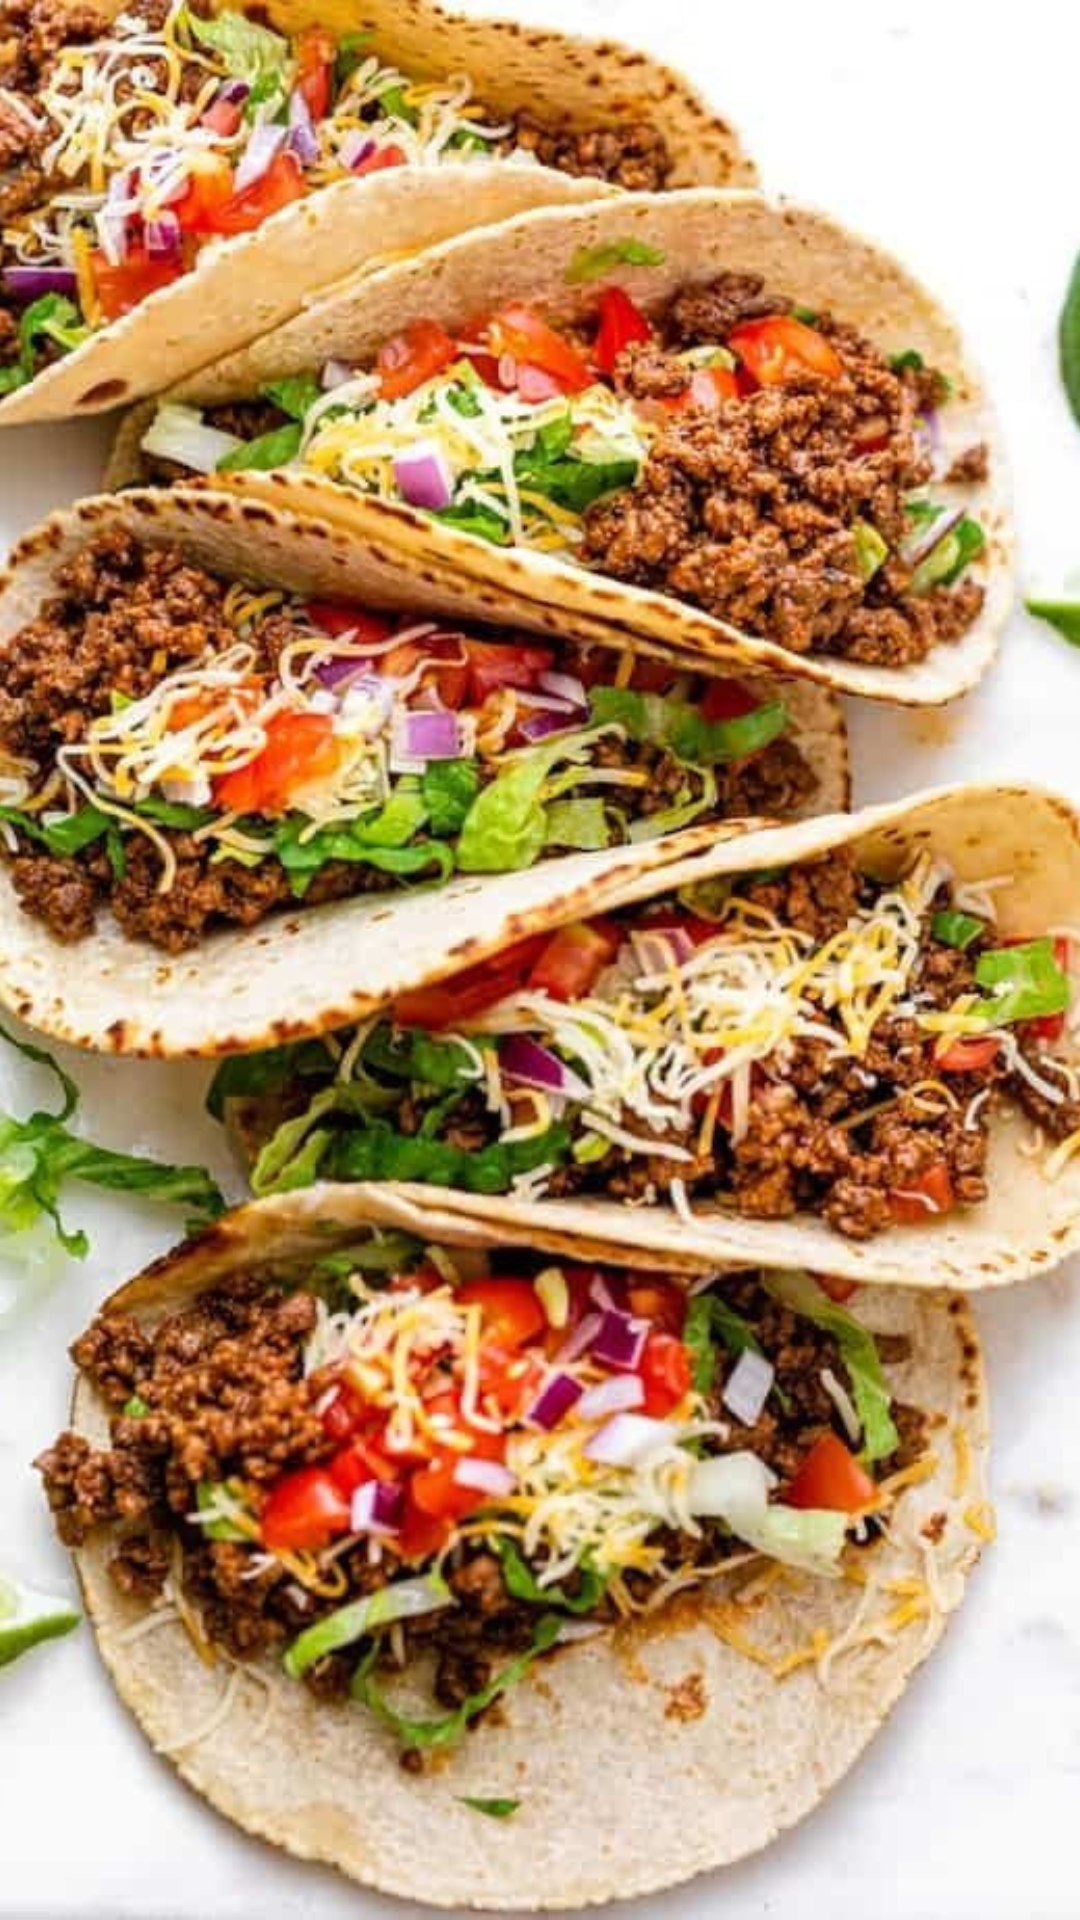 21 Quick and Easy Ground Beef Meals Ready in Thirty Minutes